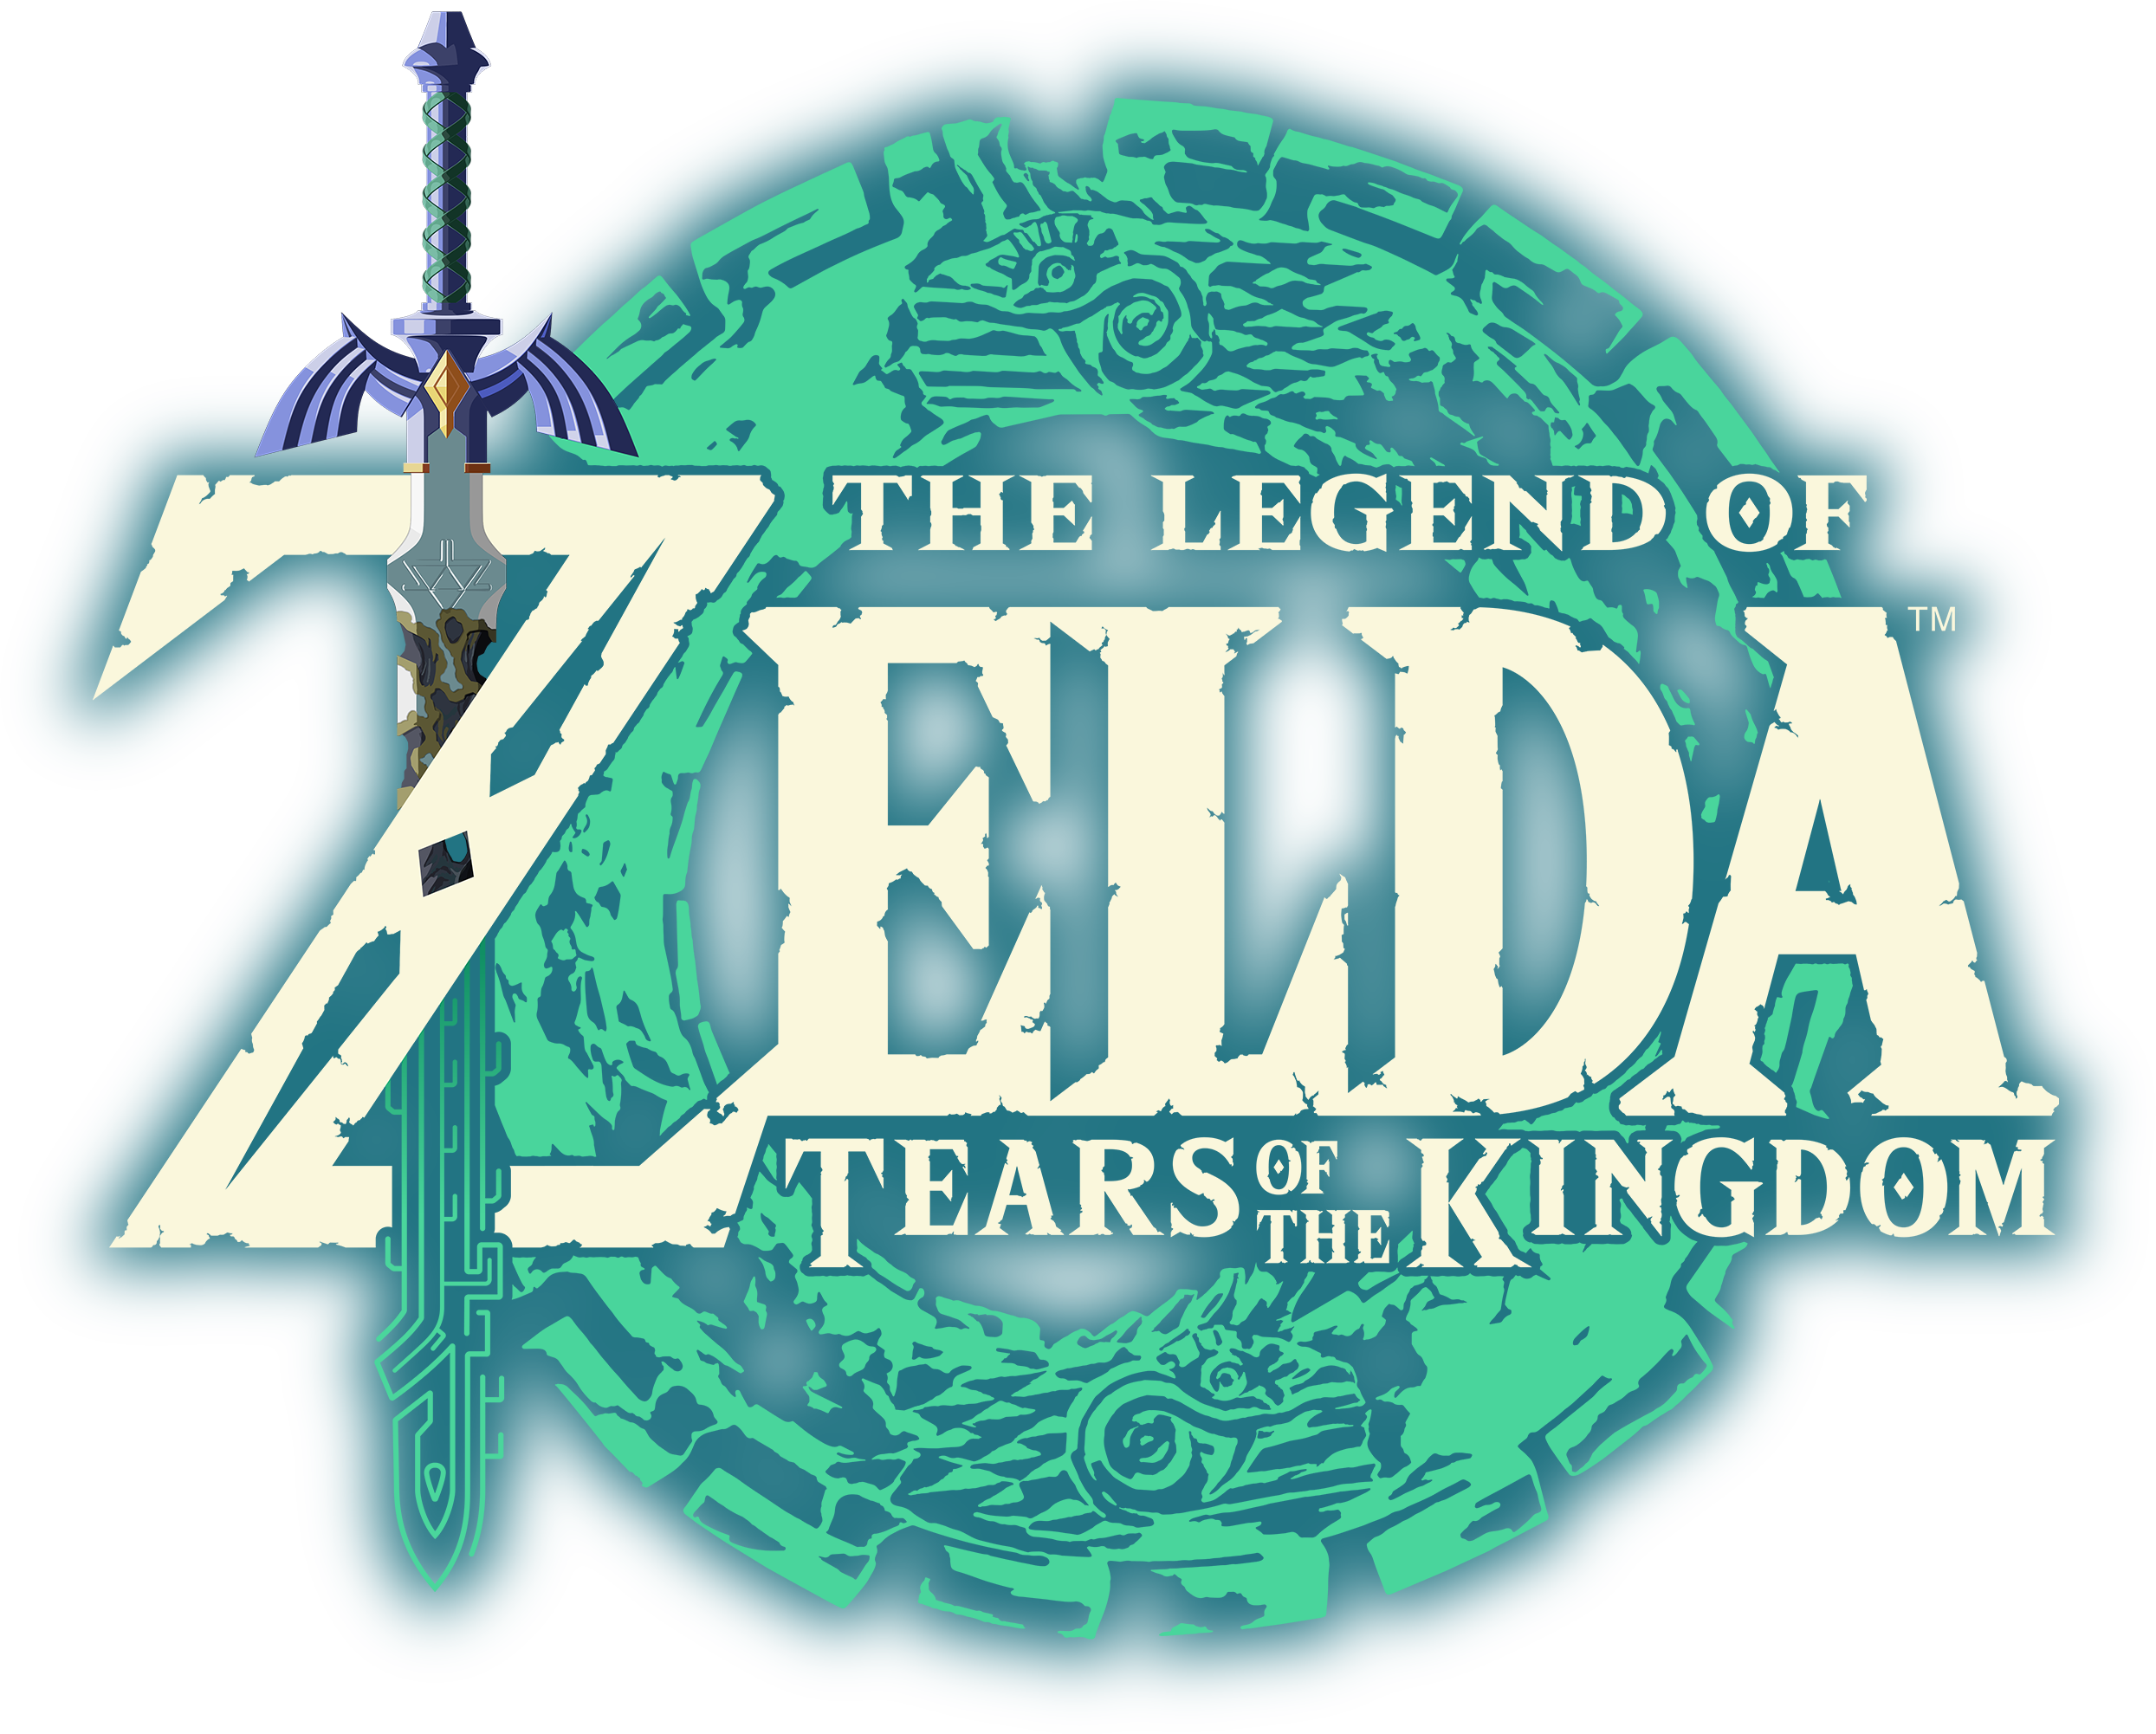 The Legend of Zelda: Tears of the Kingdom' Review